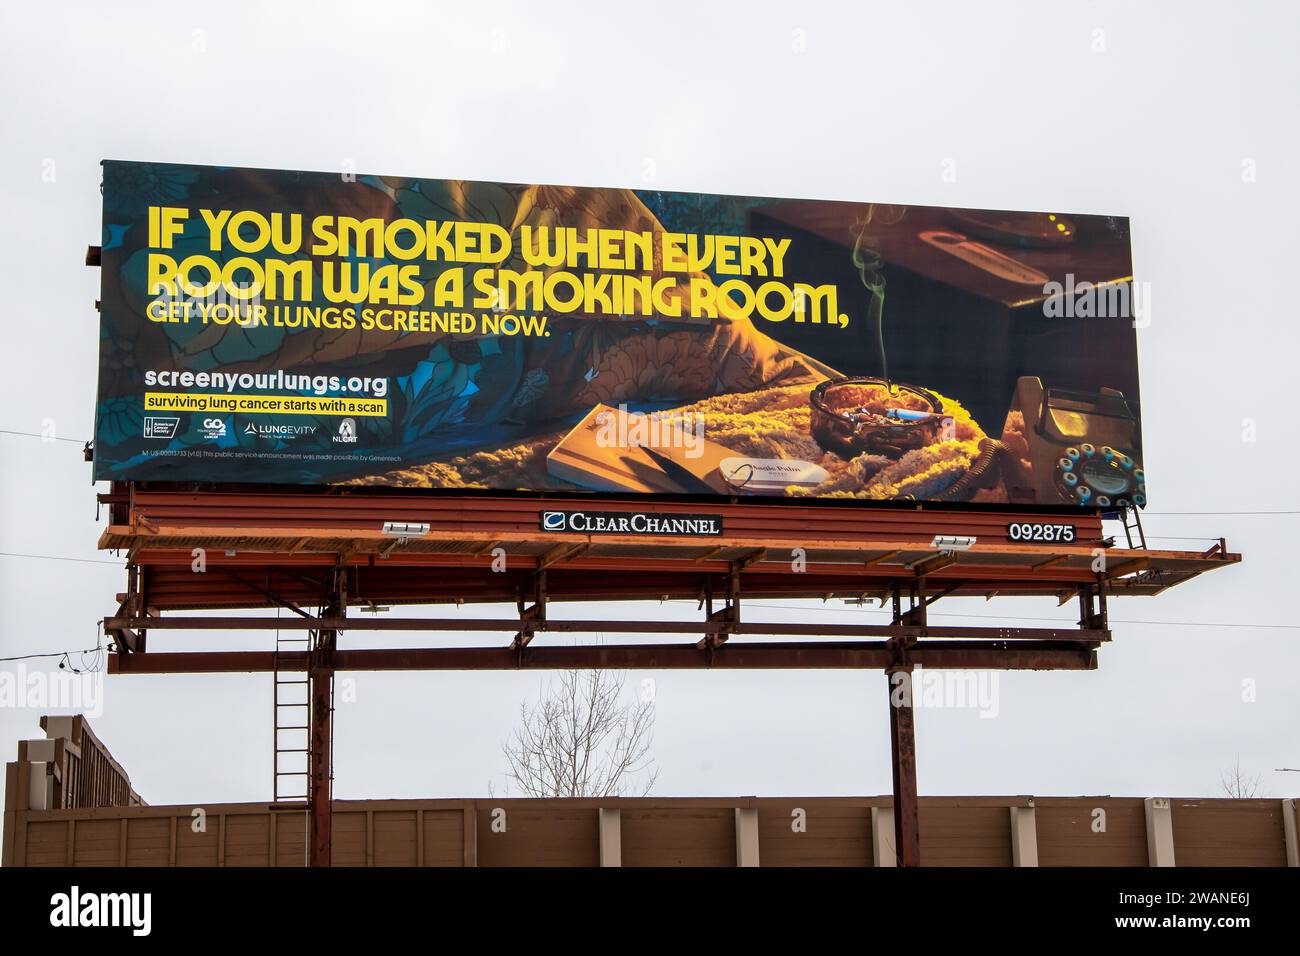 Vadnais Heights, Minnesota.  Billboard advertising to get your lungs screened for cancer if you smoked. Stock Photo